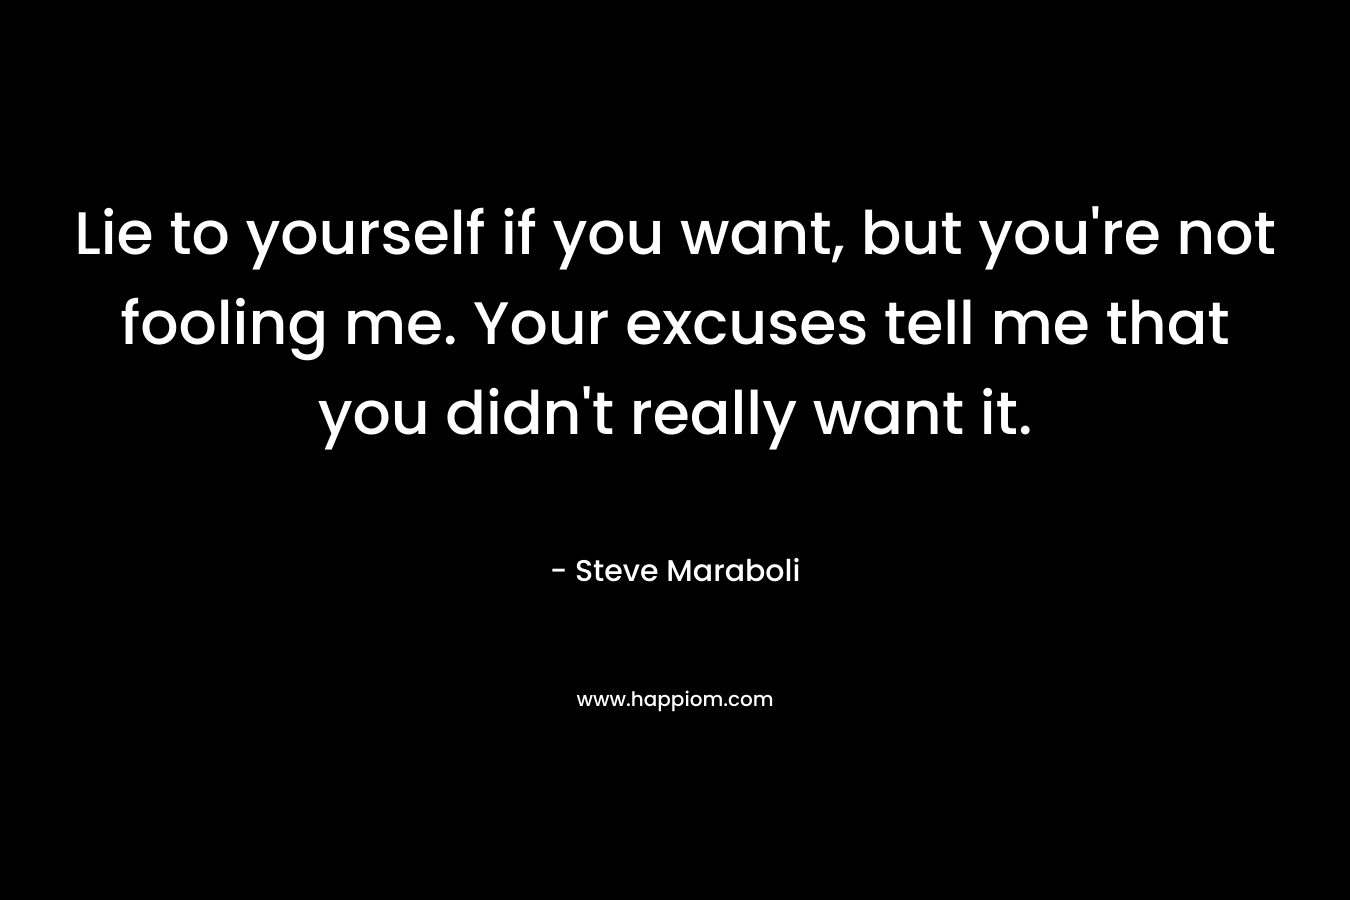 Lie to yourself if you want, but you're not fooling me. Your excuses tell me that you didn't really want it.